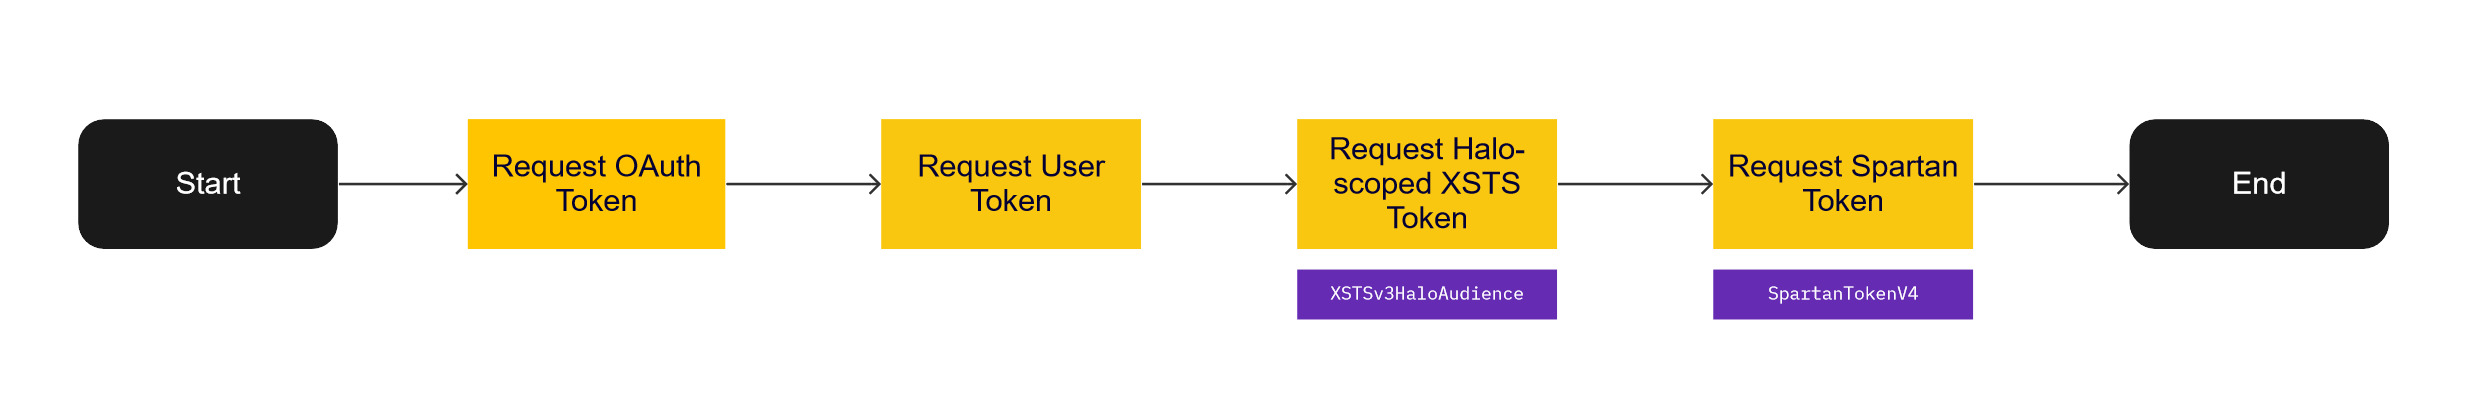 Token request process for a Spartan token at the end